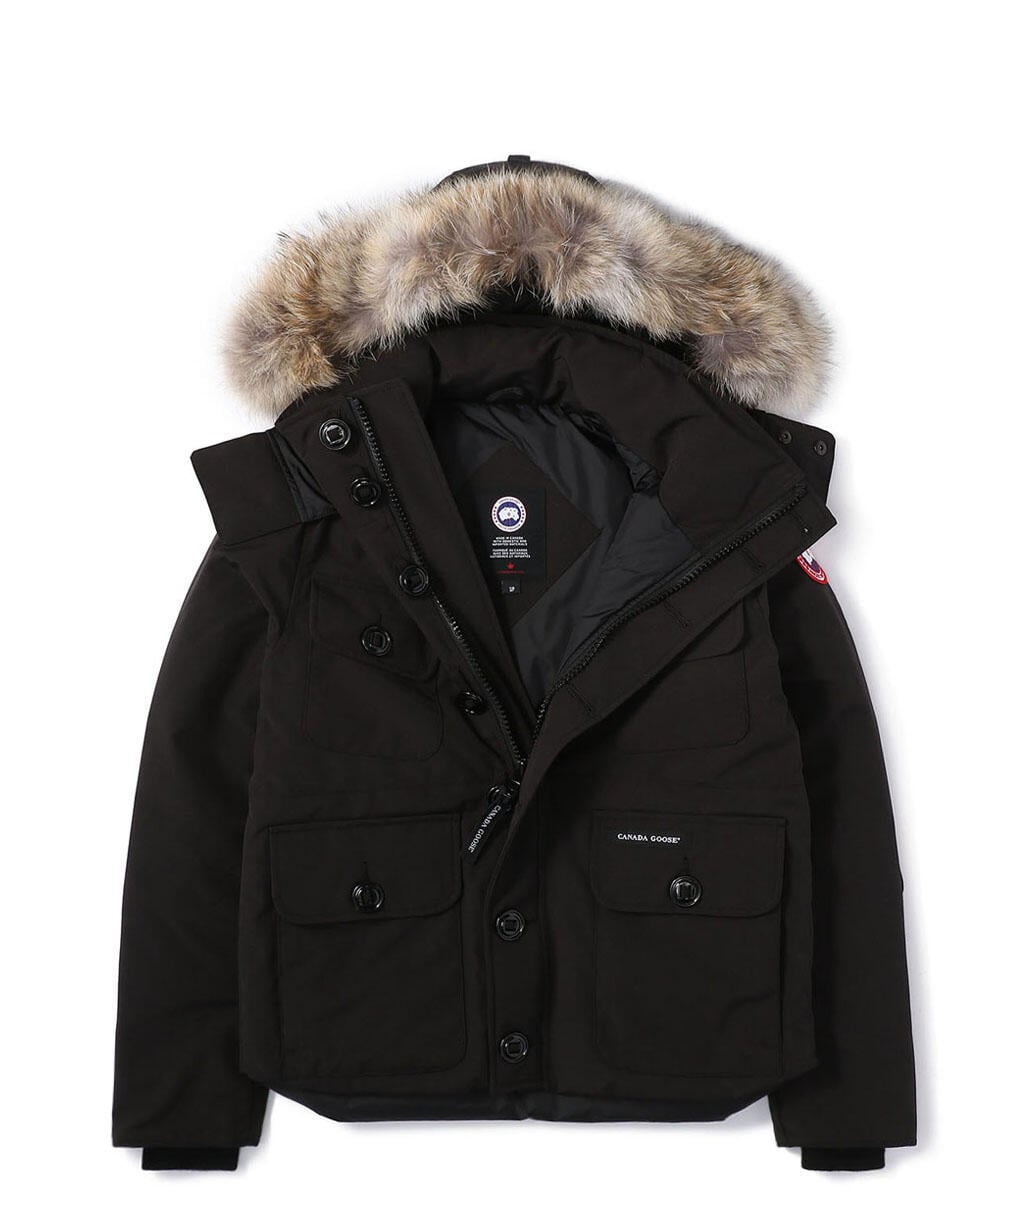 CANADA GOOSE/カナダグース | BOOMERANG,Lola,Thingsly公式通販サイト